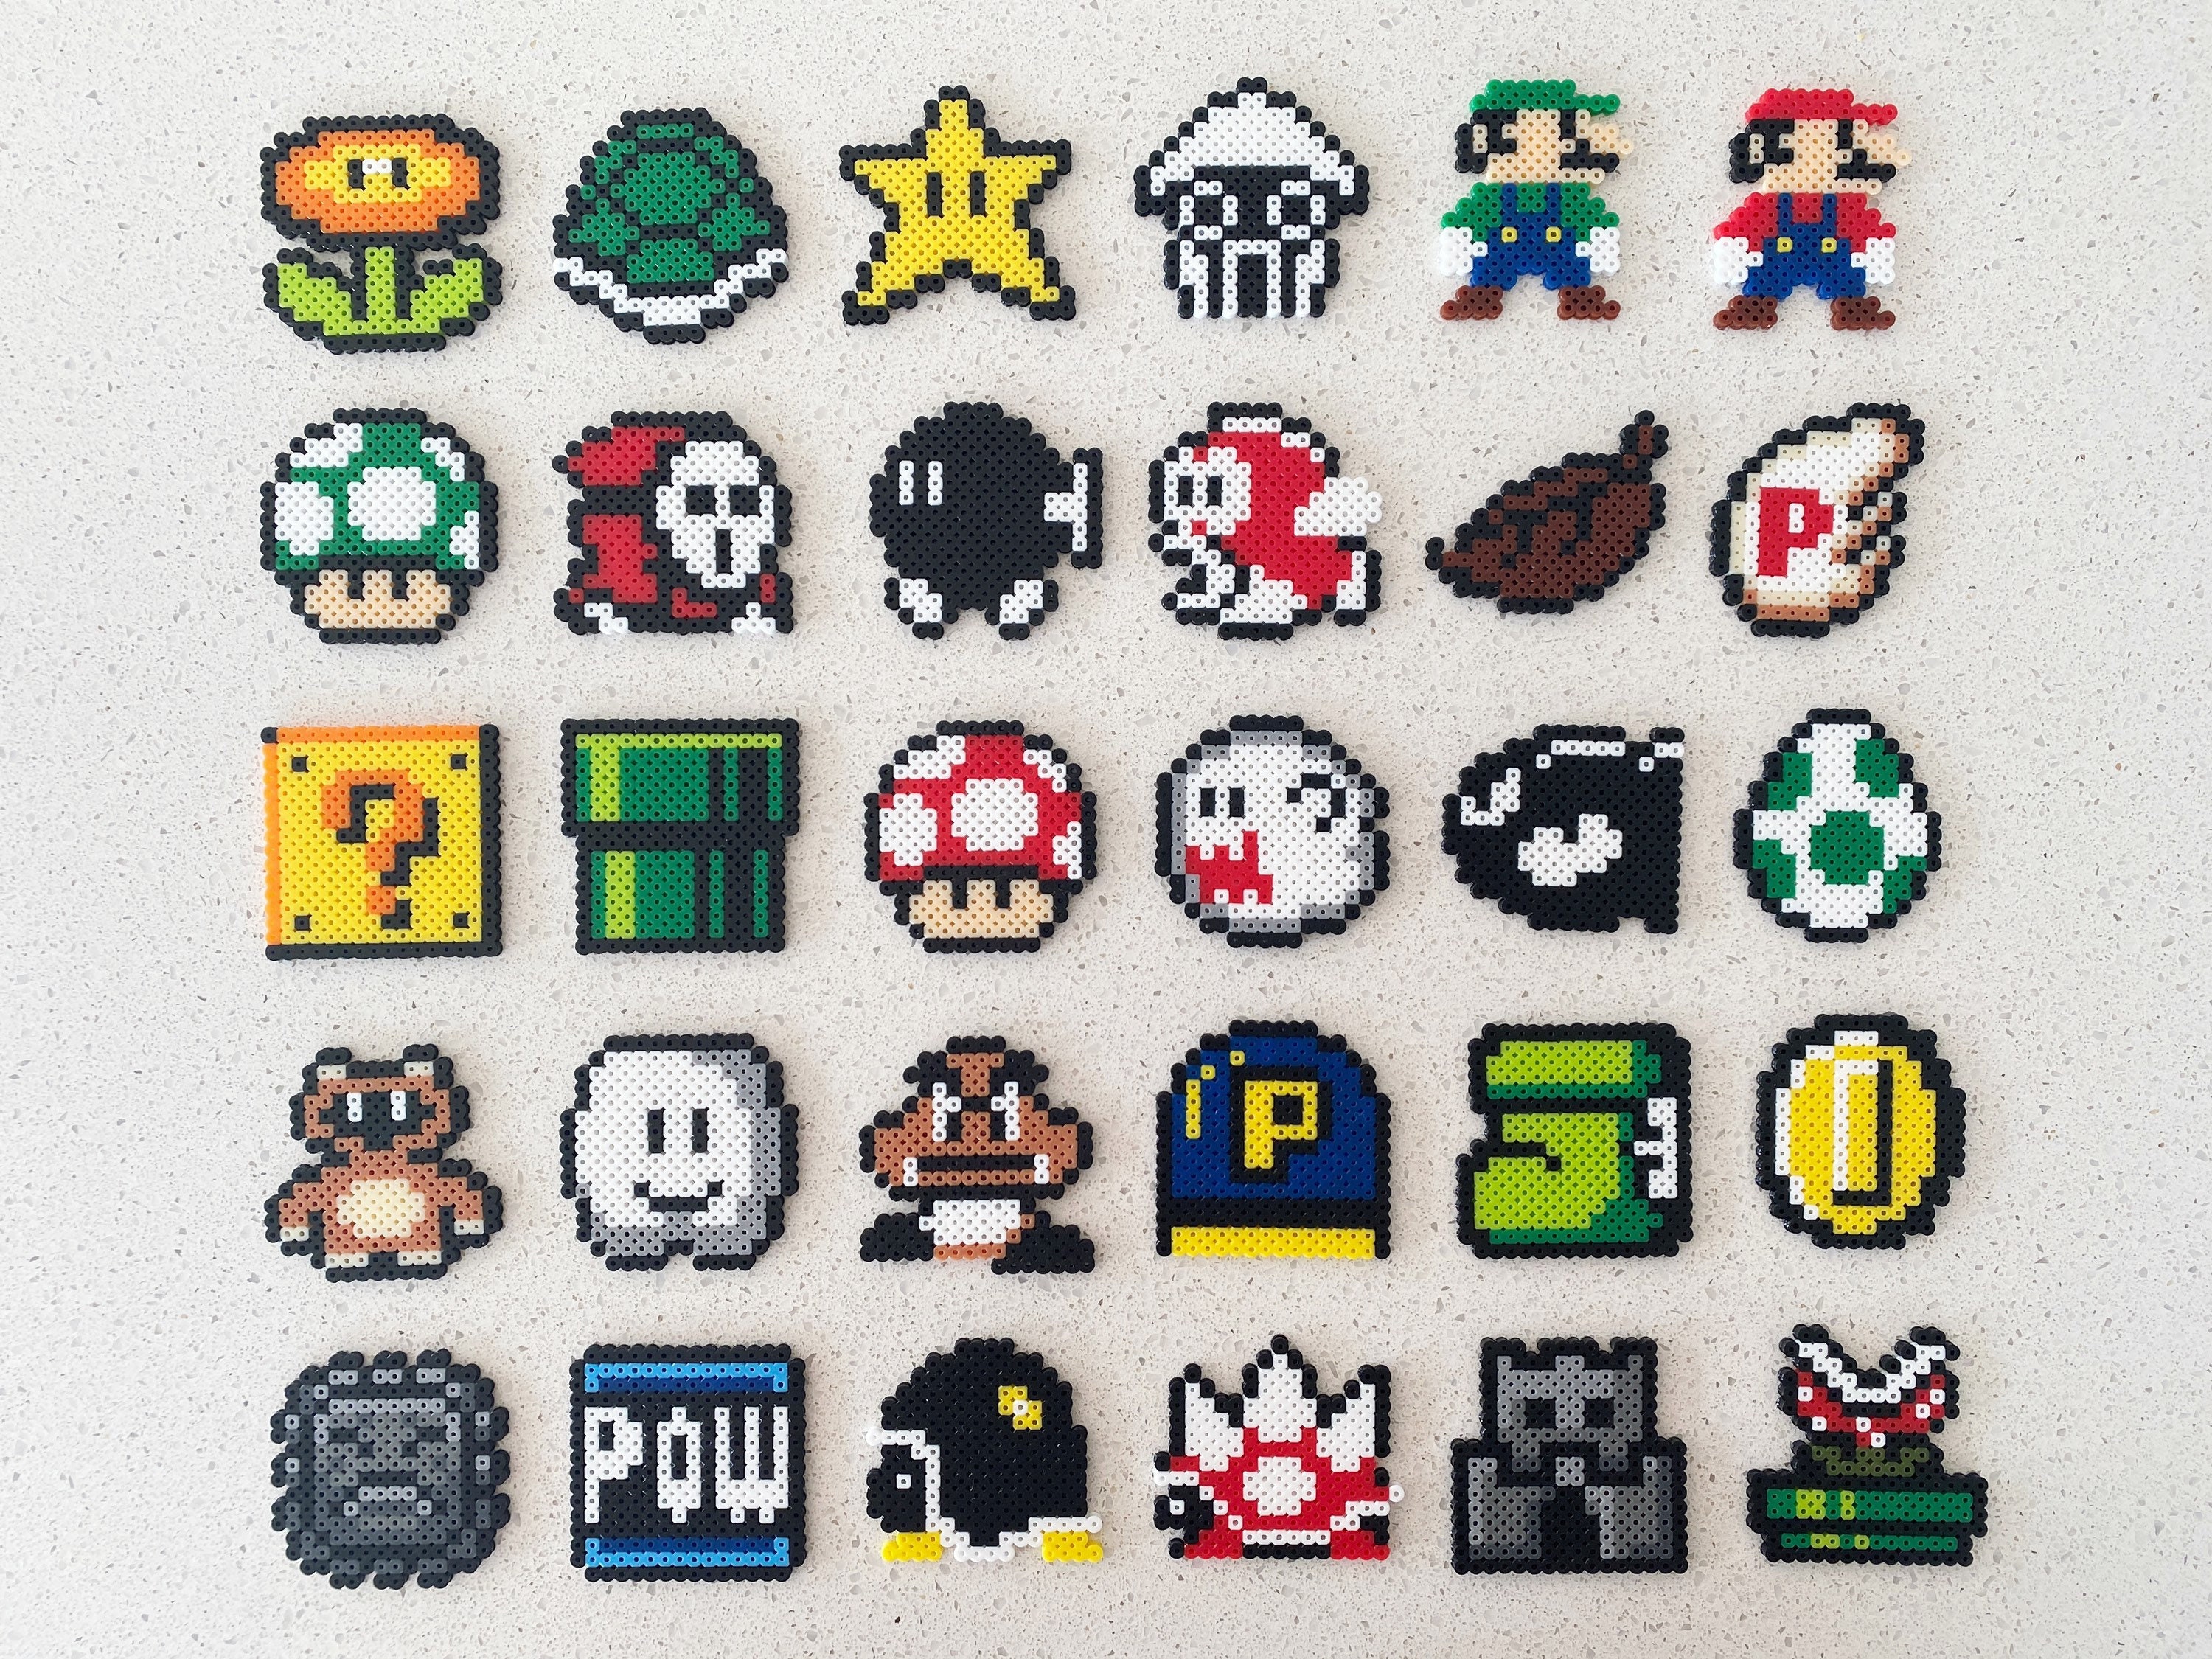 EVORETRO Pixel Art Bead Fuse Beads Perler Compatible Large Kit Colorful Bead Create 2D Pixelated Wall Art, Retro Video Games Characters